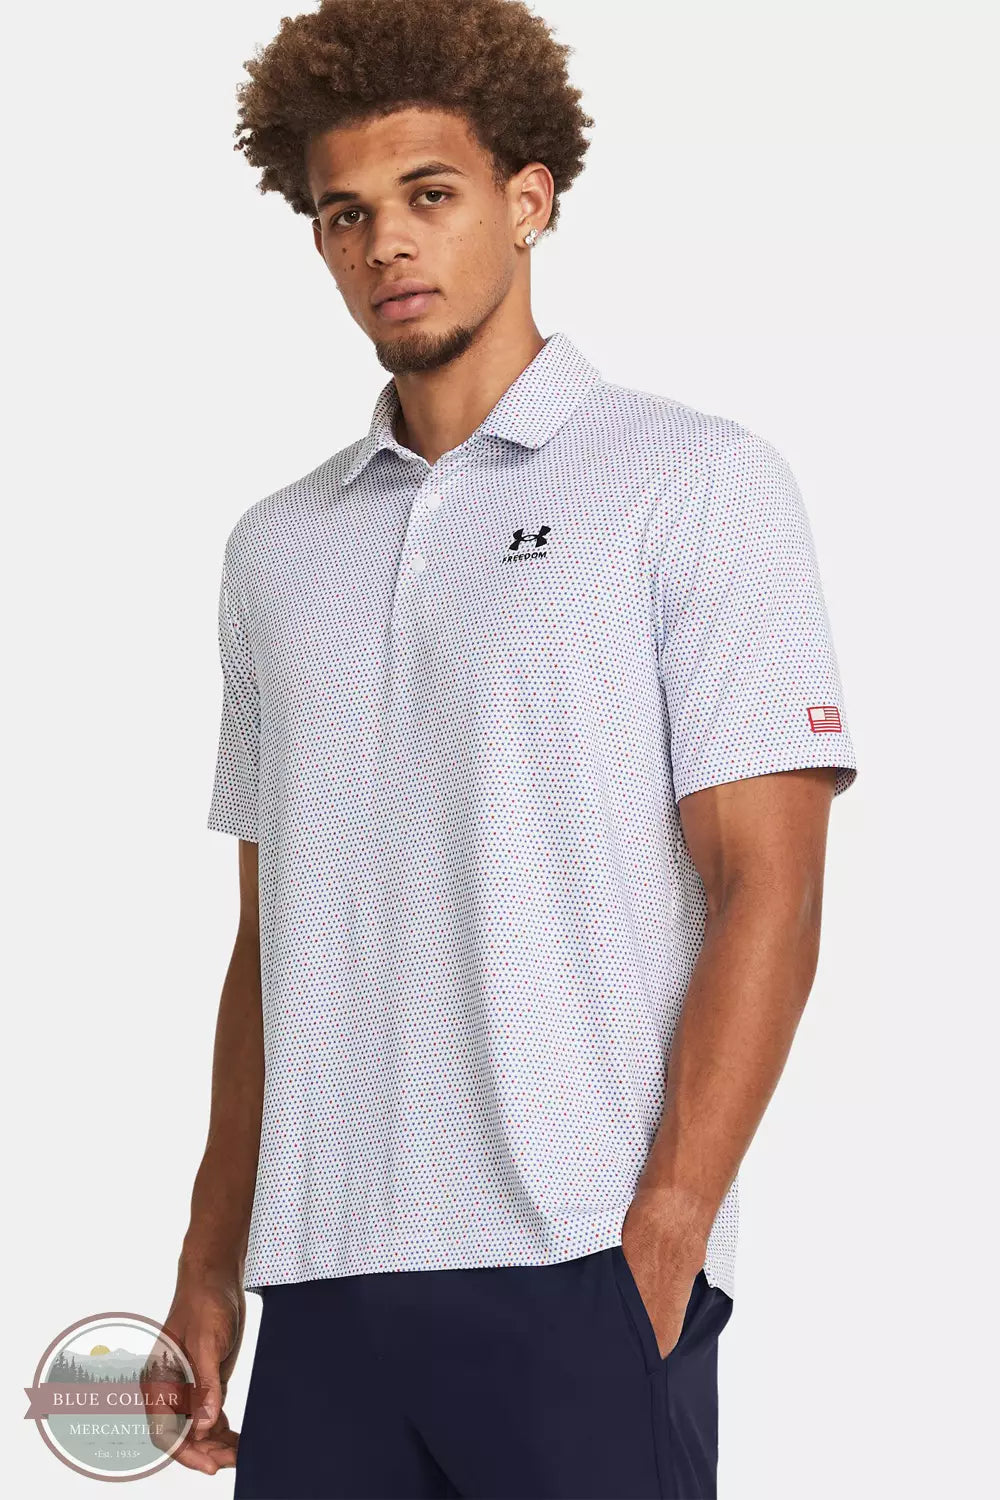 Playoff 3.0 Freedom Printed Polo Shirt Under Armour 1383979